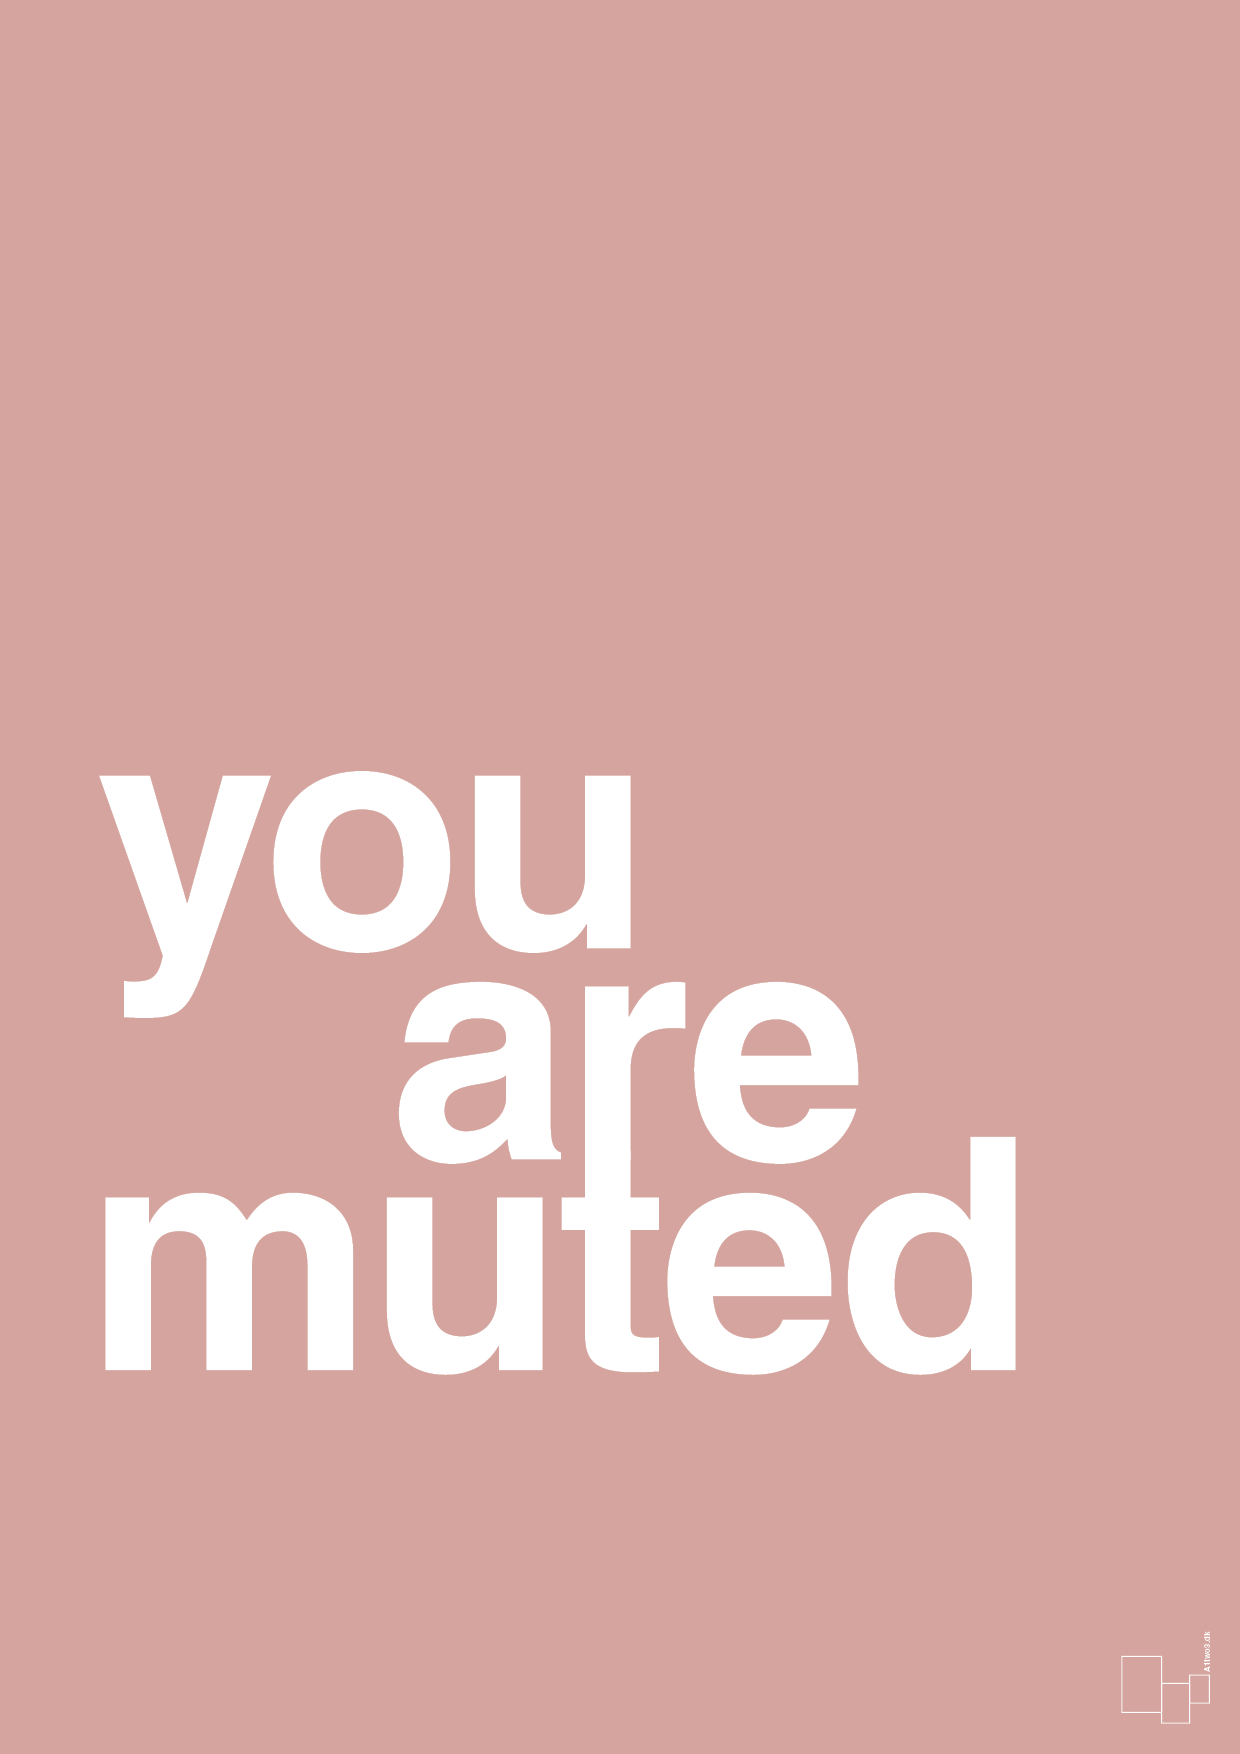 you are muted - Plakat med Ordsprog i Bubble Shell